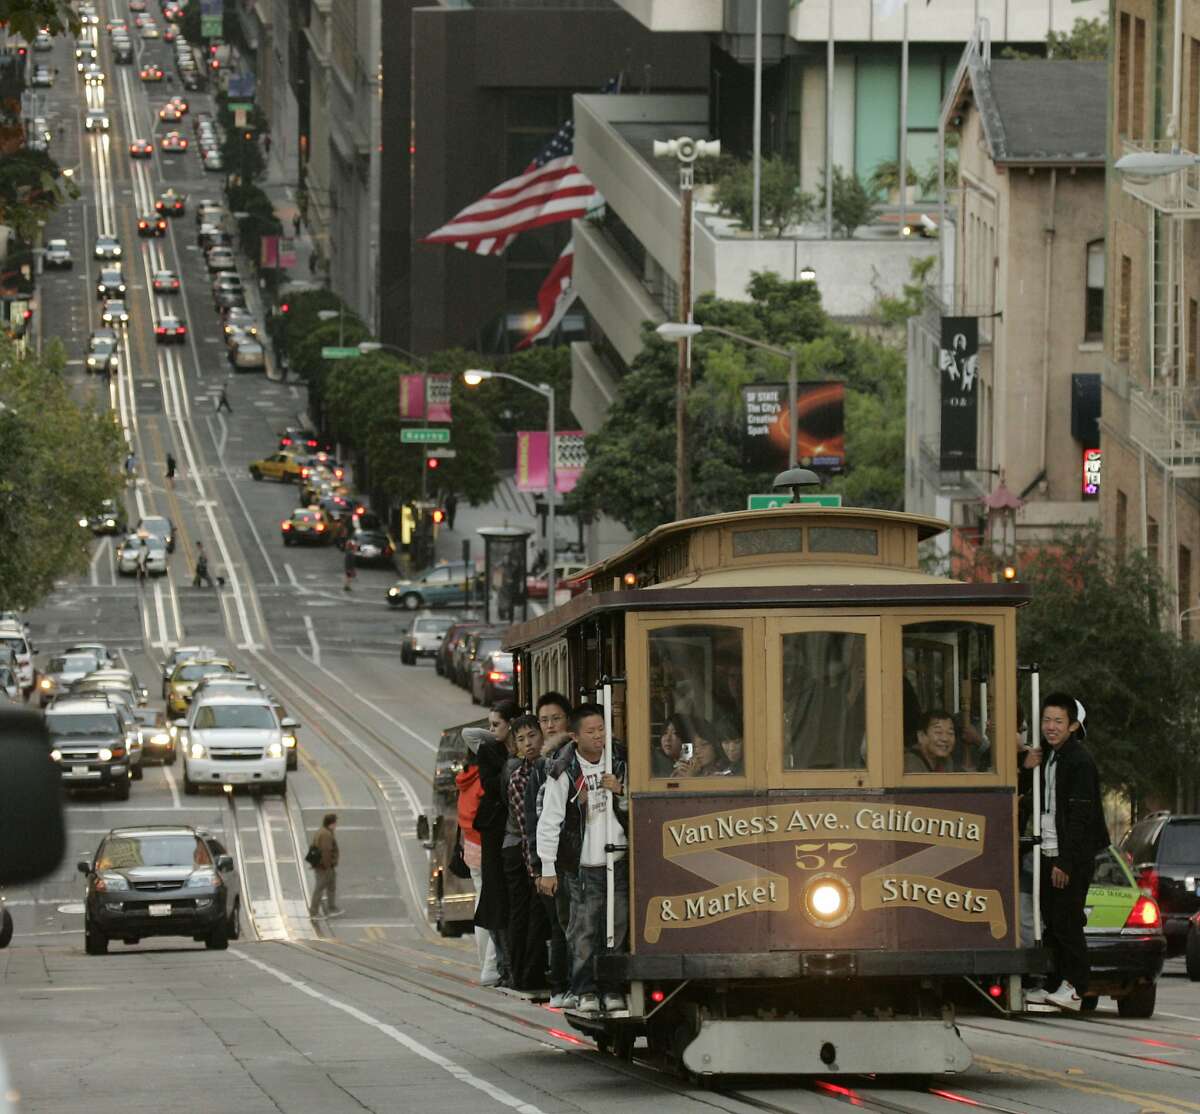 A cable car makes its way up a steep hill on California St. in San Francisco, Wednesday, Oct. 8, 2008. The California cable car line is the least crowded of the three working lines and is the one most often used by locals. (AP Photo/Marcio Jose Sanchez)